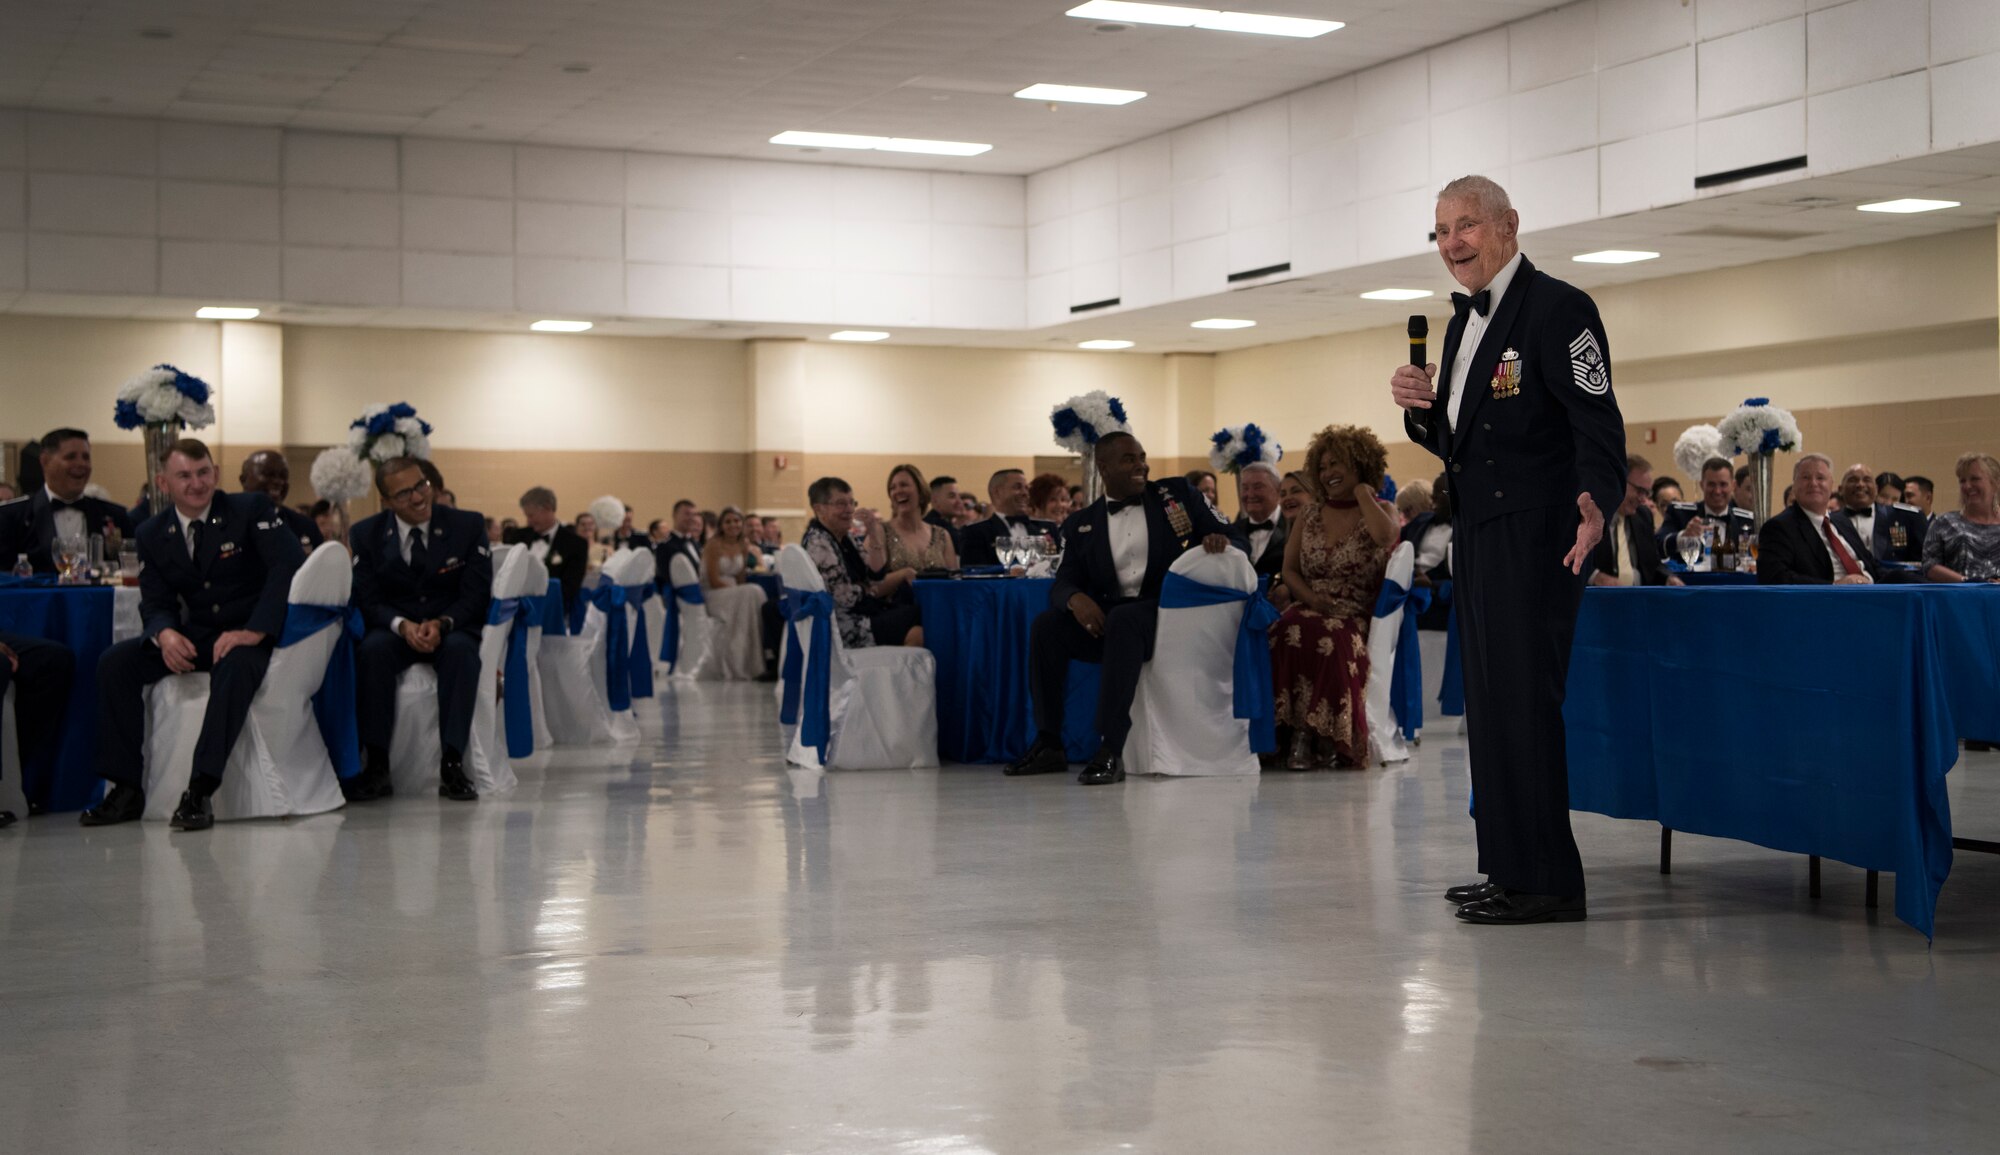 Retired Chief Master Sgt. of the Air Force Robert Gaylor, fifth CMSAF shares stories from his days in the Air Force at Laughlin’s Air Force Ball in Del Rio, Texas, Sept. 13, 2019. Gaylor spoke about some life principles that he found helpful, one being trust; something Gaylor said he and his wingmen had to earn. He went on to share how proud he is of today’s Airmen and the way they protect and build on that trust Gaylor worked so hard for. (U.S. Air Force photo by Staff Sgt. Benjamin N. Valmoja)